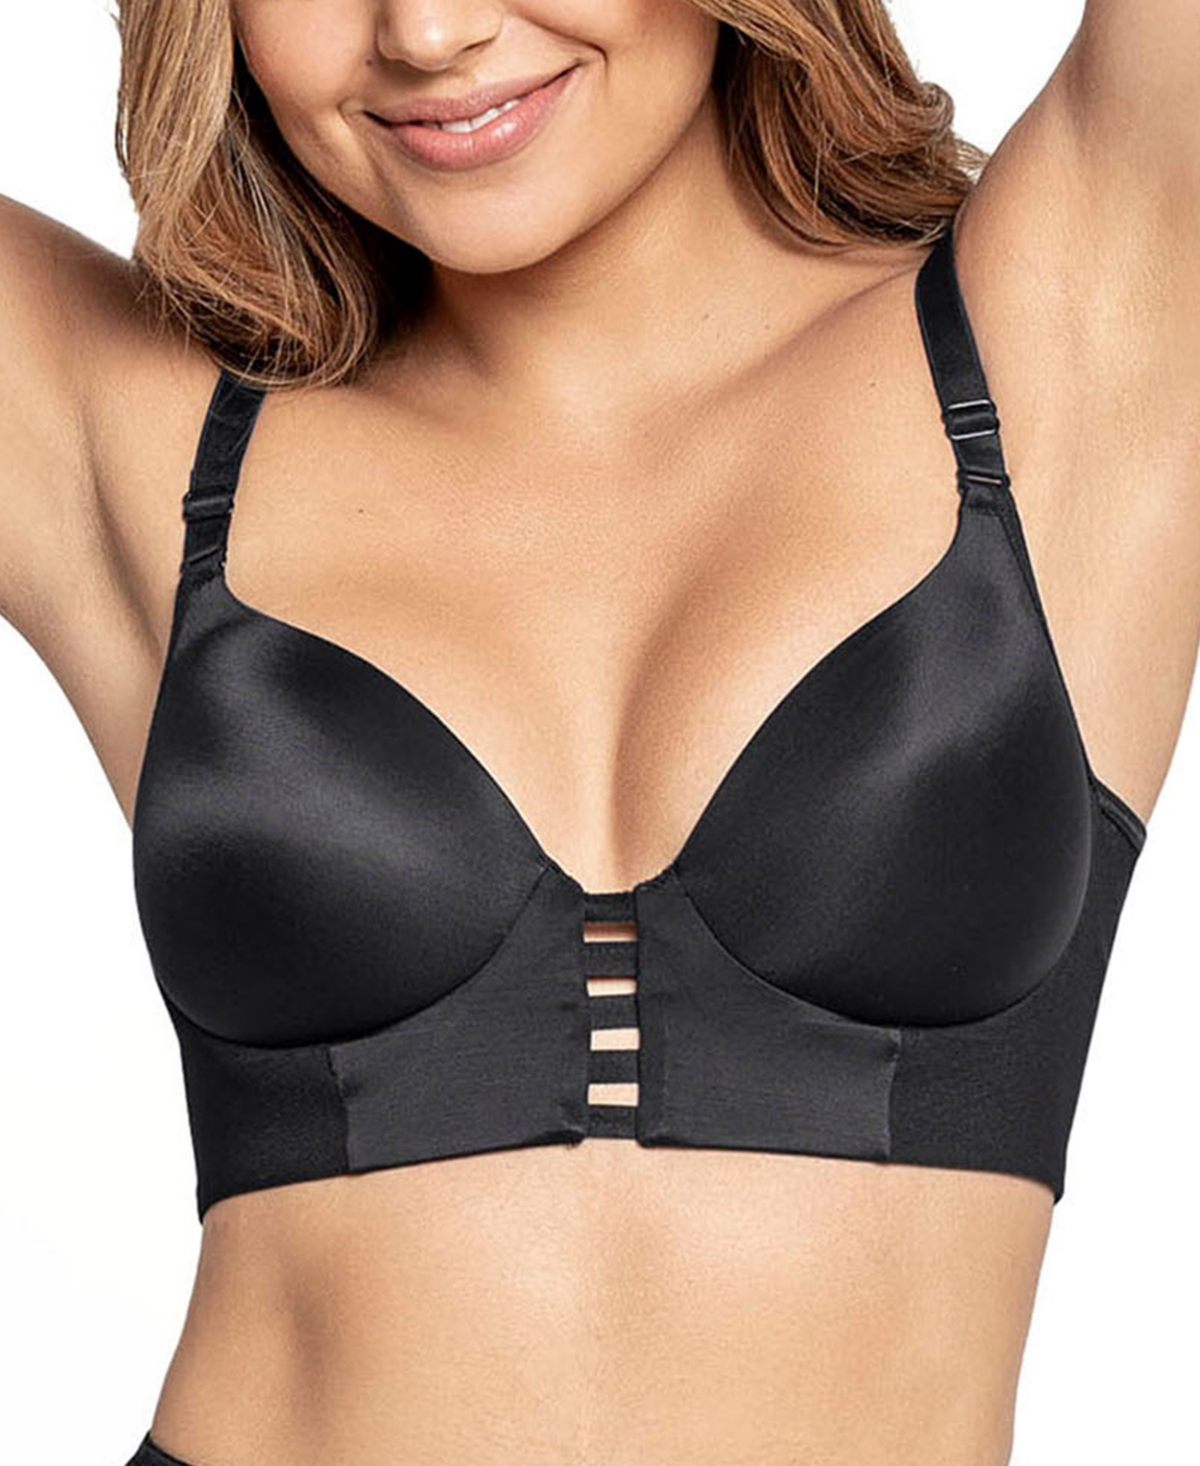 Memory Foam Push-Up Underwire Bustier Bra with Strappy Front